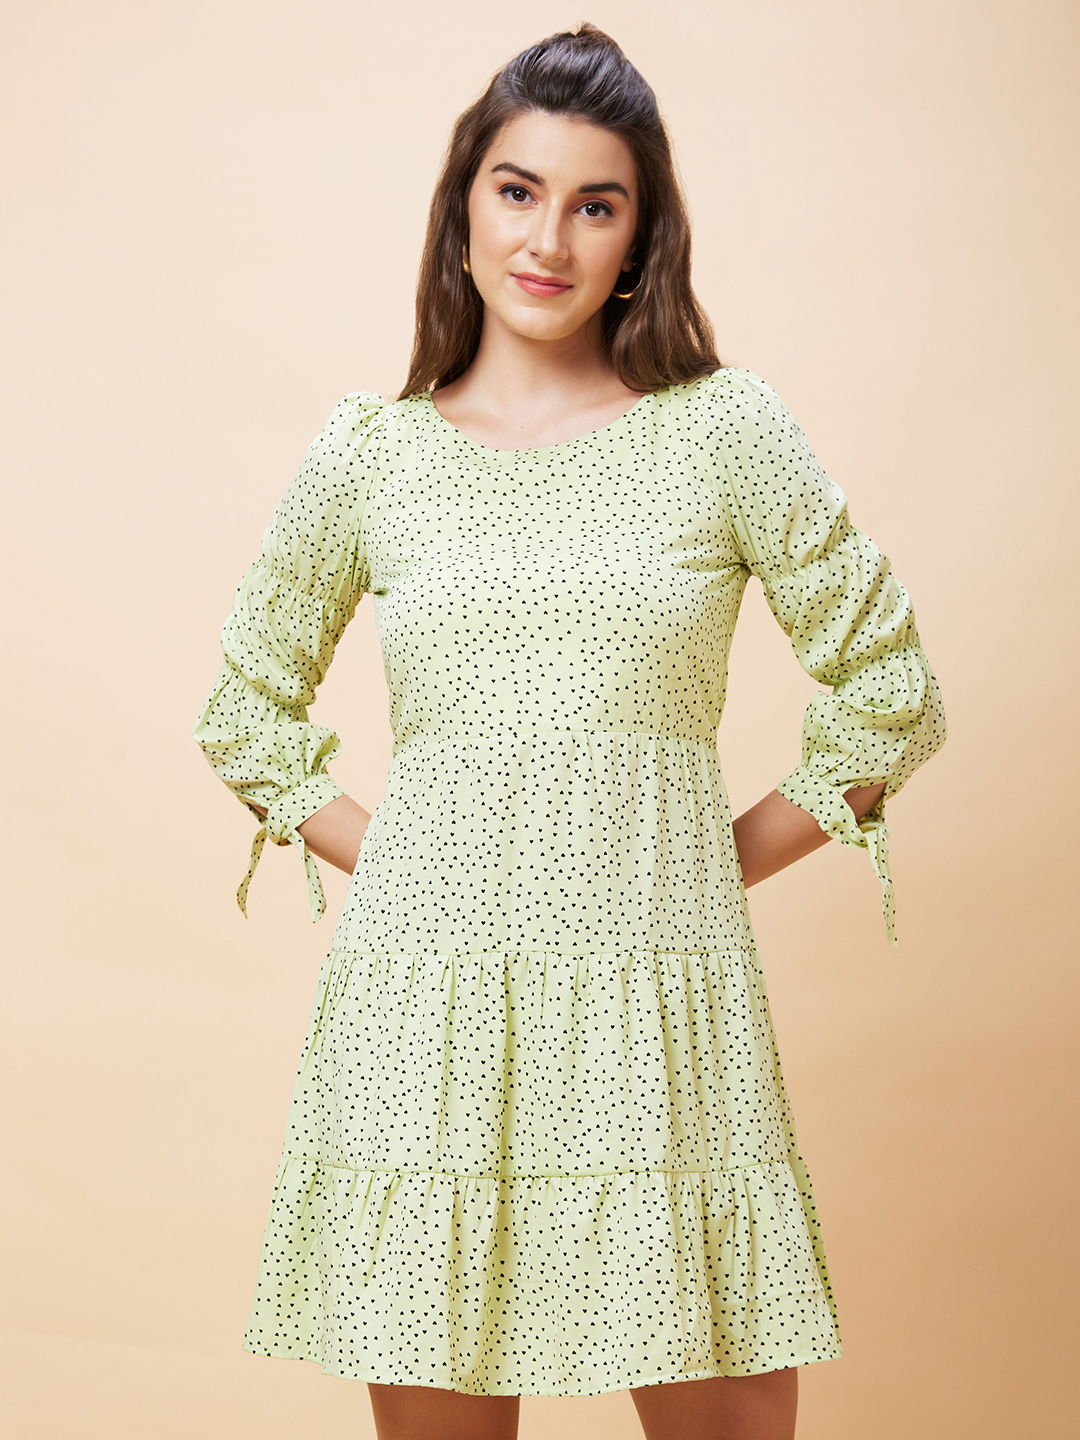 Globus Women Lime Green Polka Dots Print Round Neck Casual Fit And Flare Dress